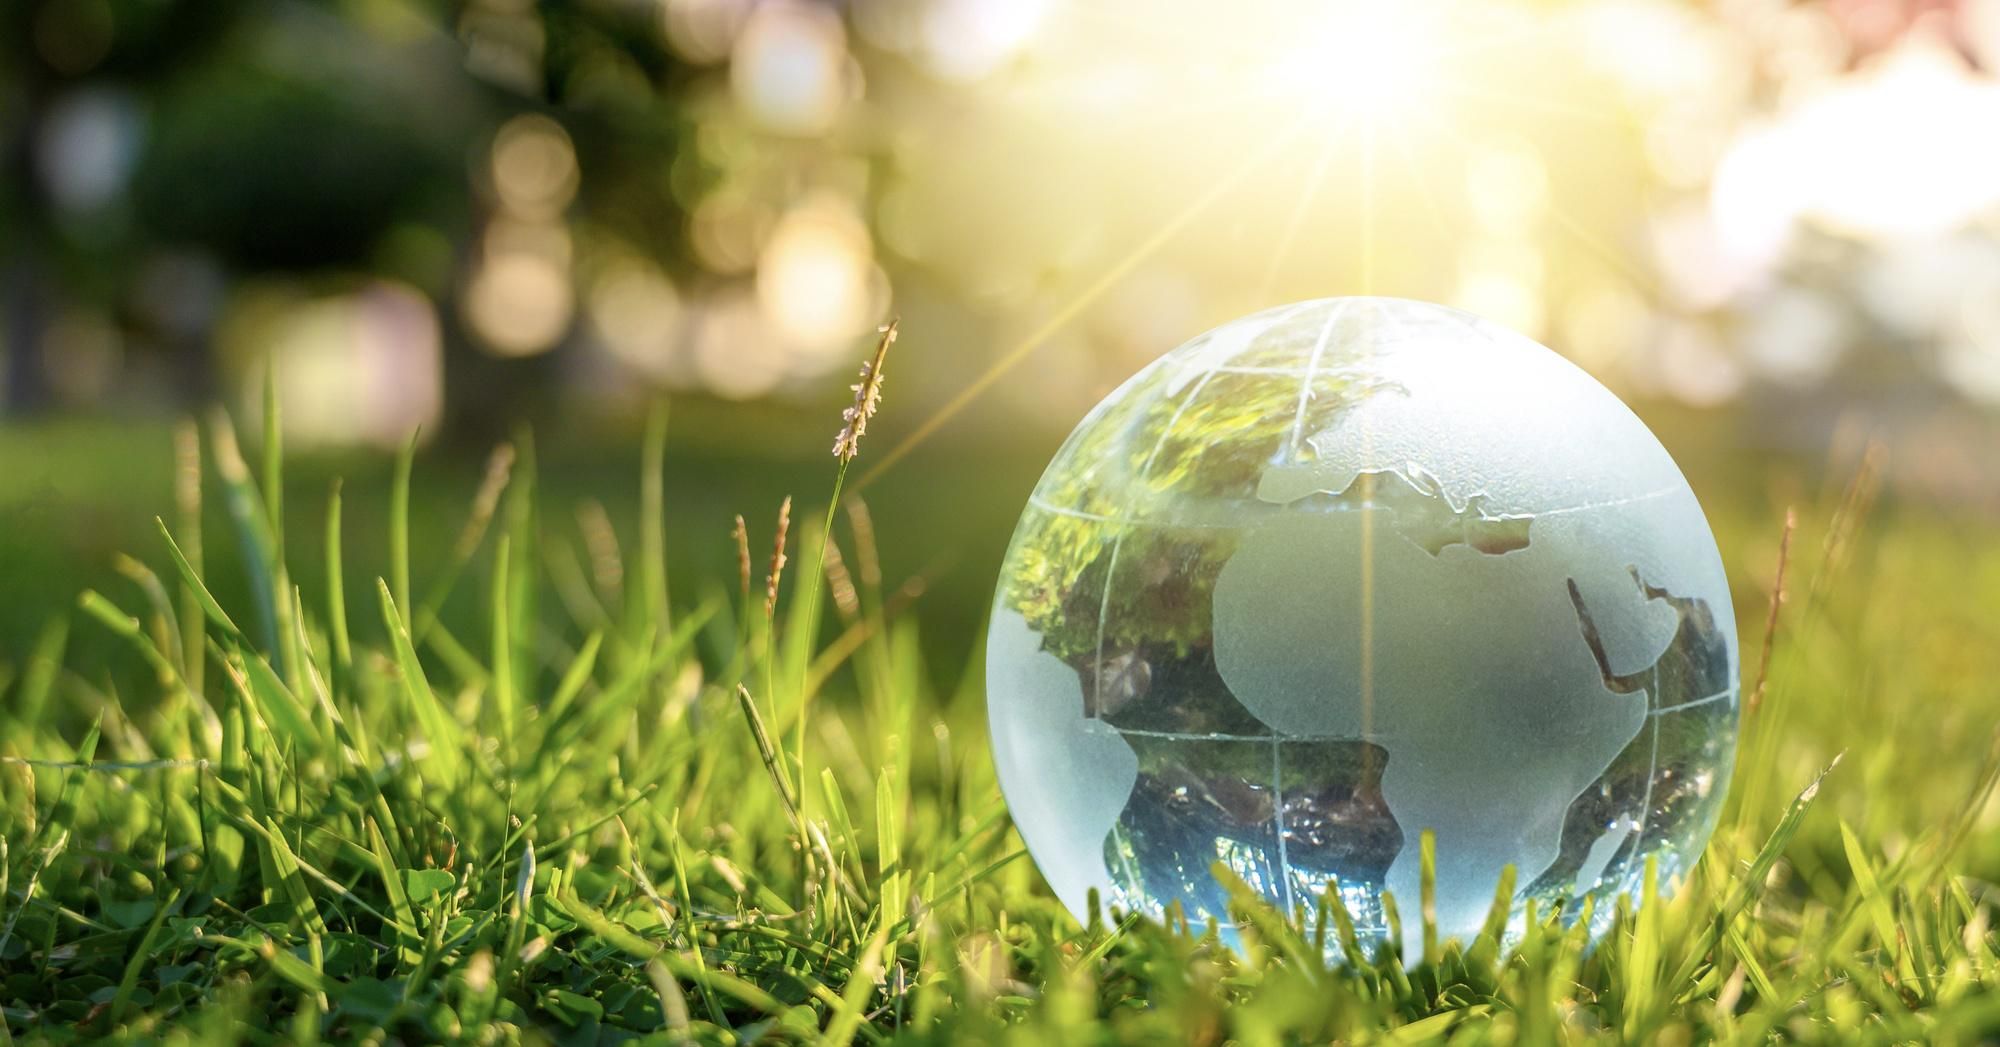 If we are to stabilize the climate system, we will need a global Green New Deal. (Photo: Shutterstock)